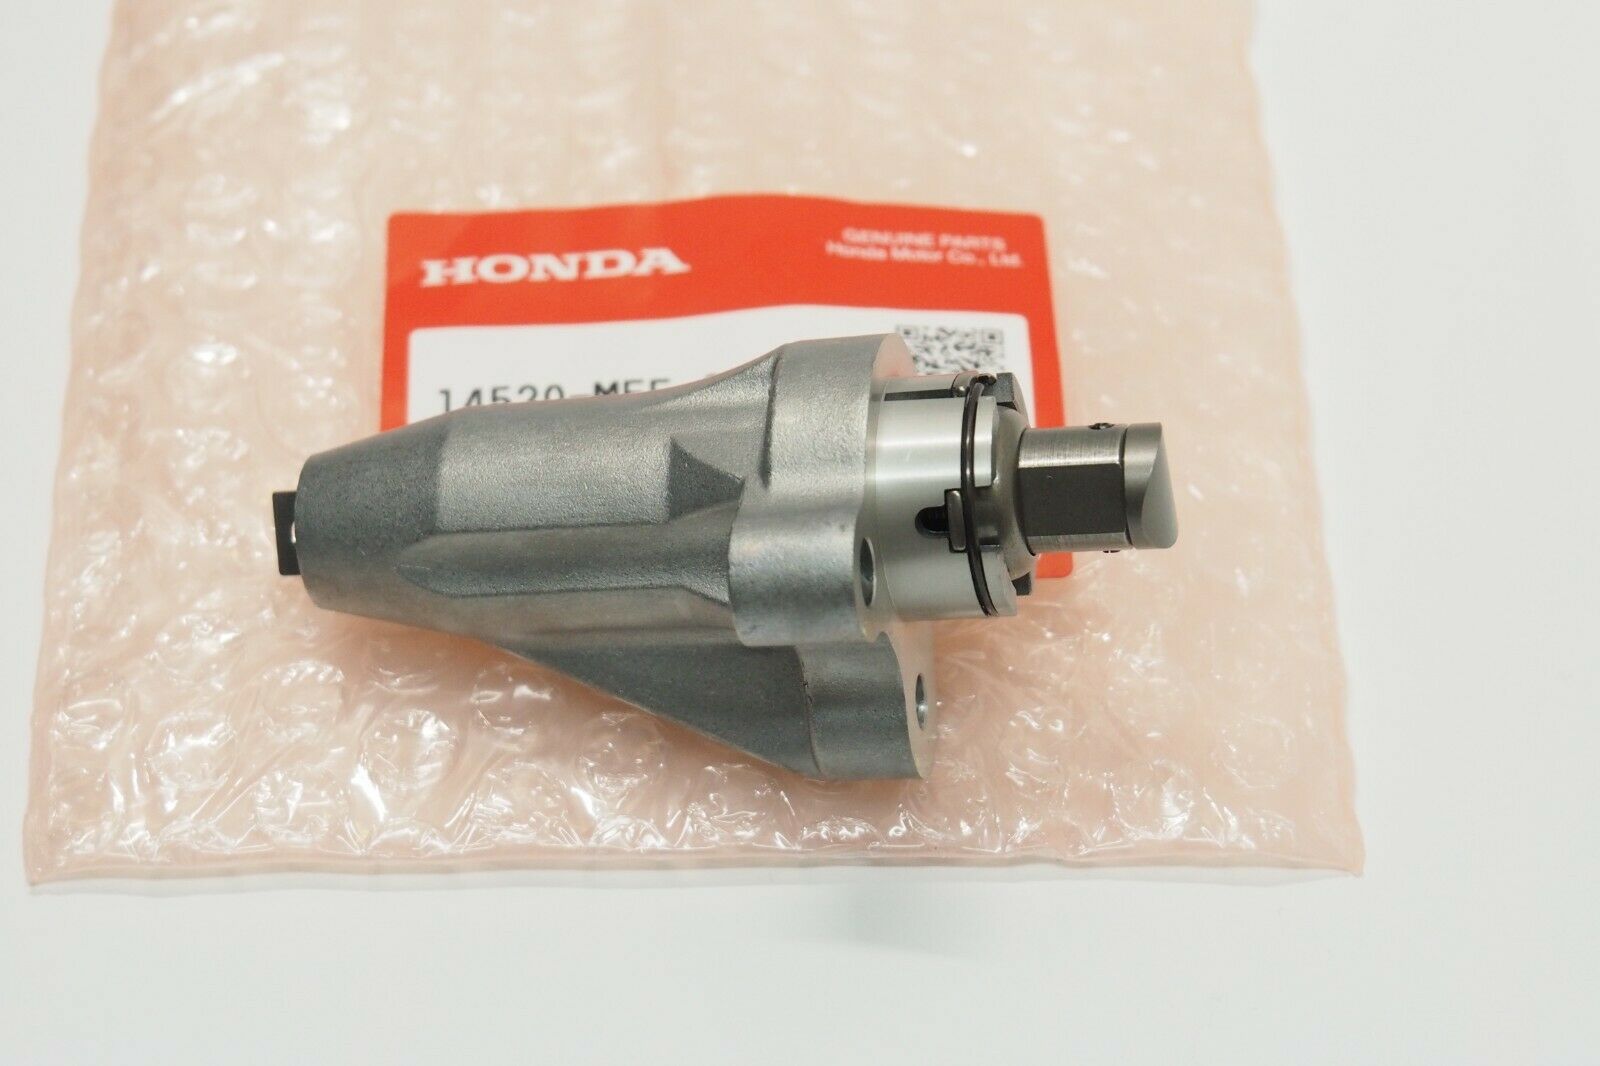 Honda Genuine 2003-2015 CBR600RR RA Cam Chain Tensioner with Gasket 14520-MEE-013 ★